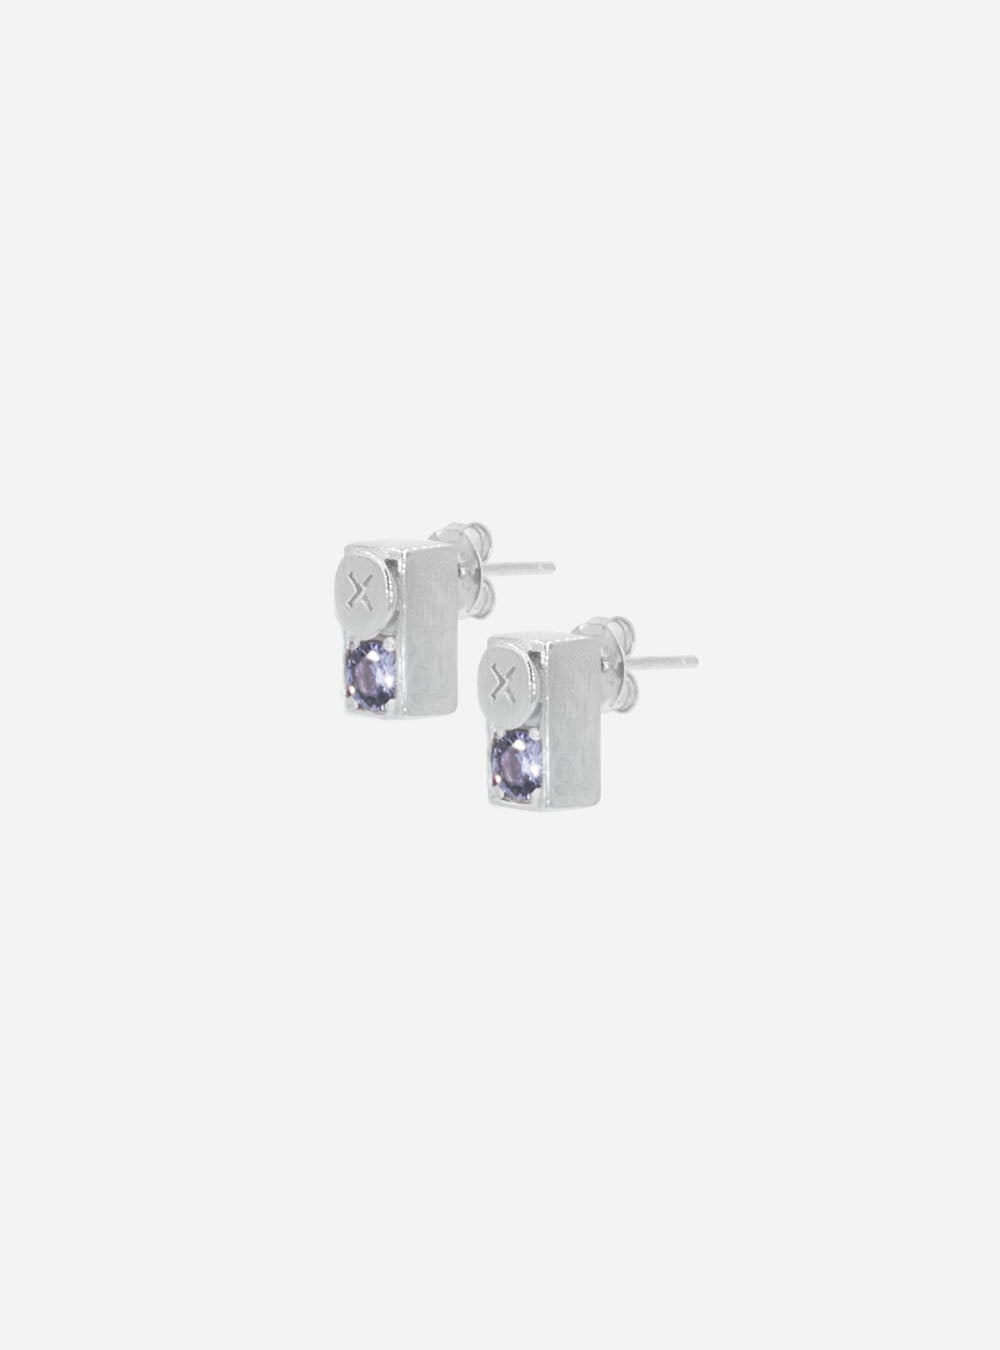 a pair of MIDNIGHTFACTORY Screwbox colour-changing earrings with a purple stone.